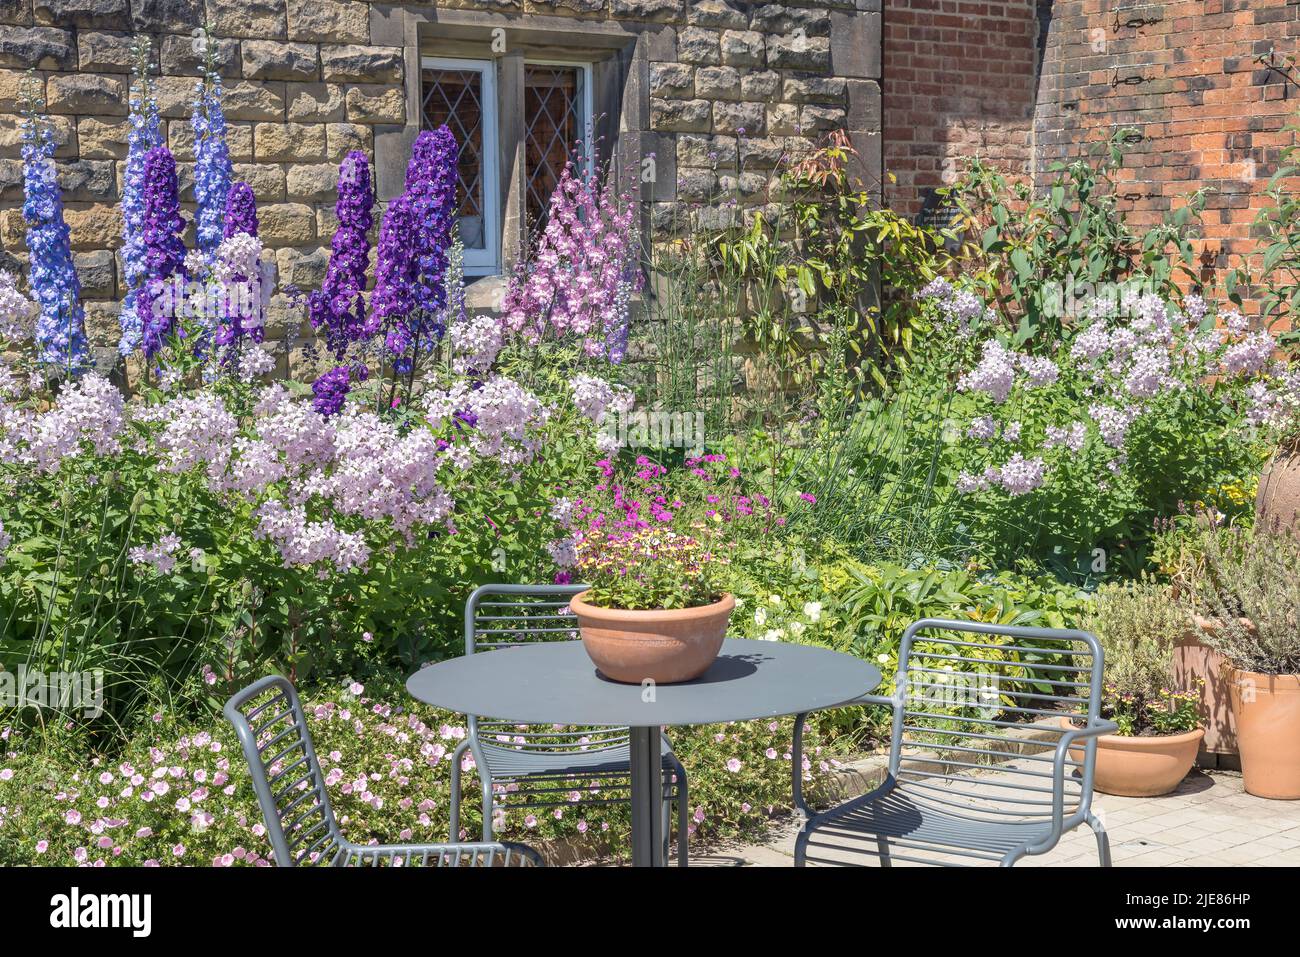 Small cottage garden with terracotta planters, table and chairs. Stock Photo